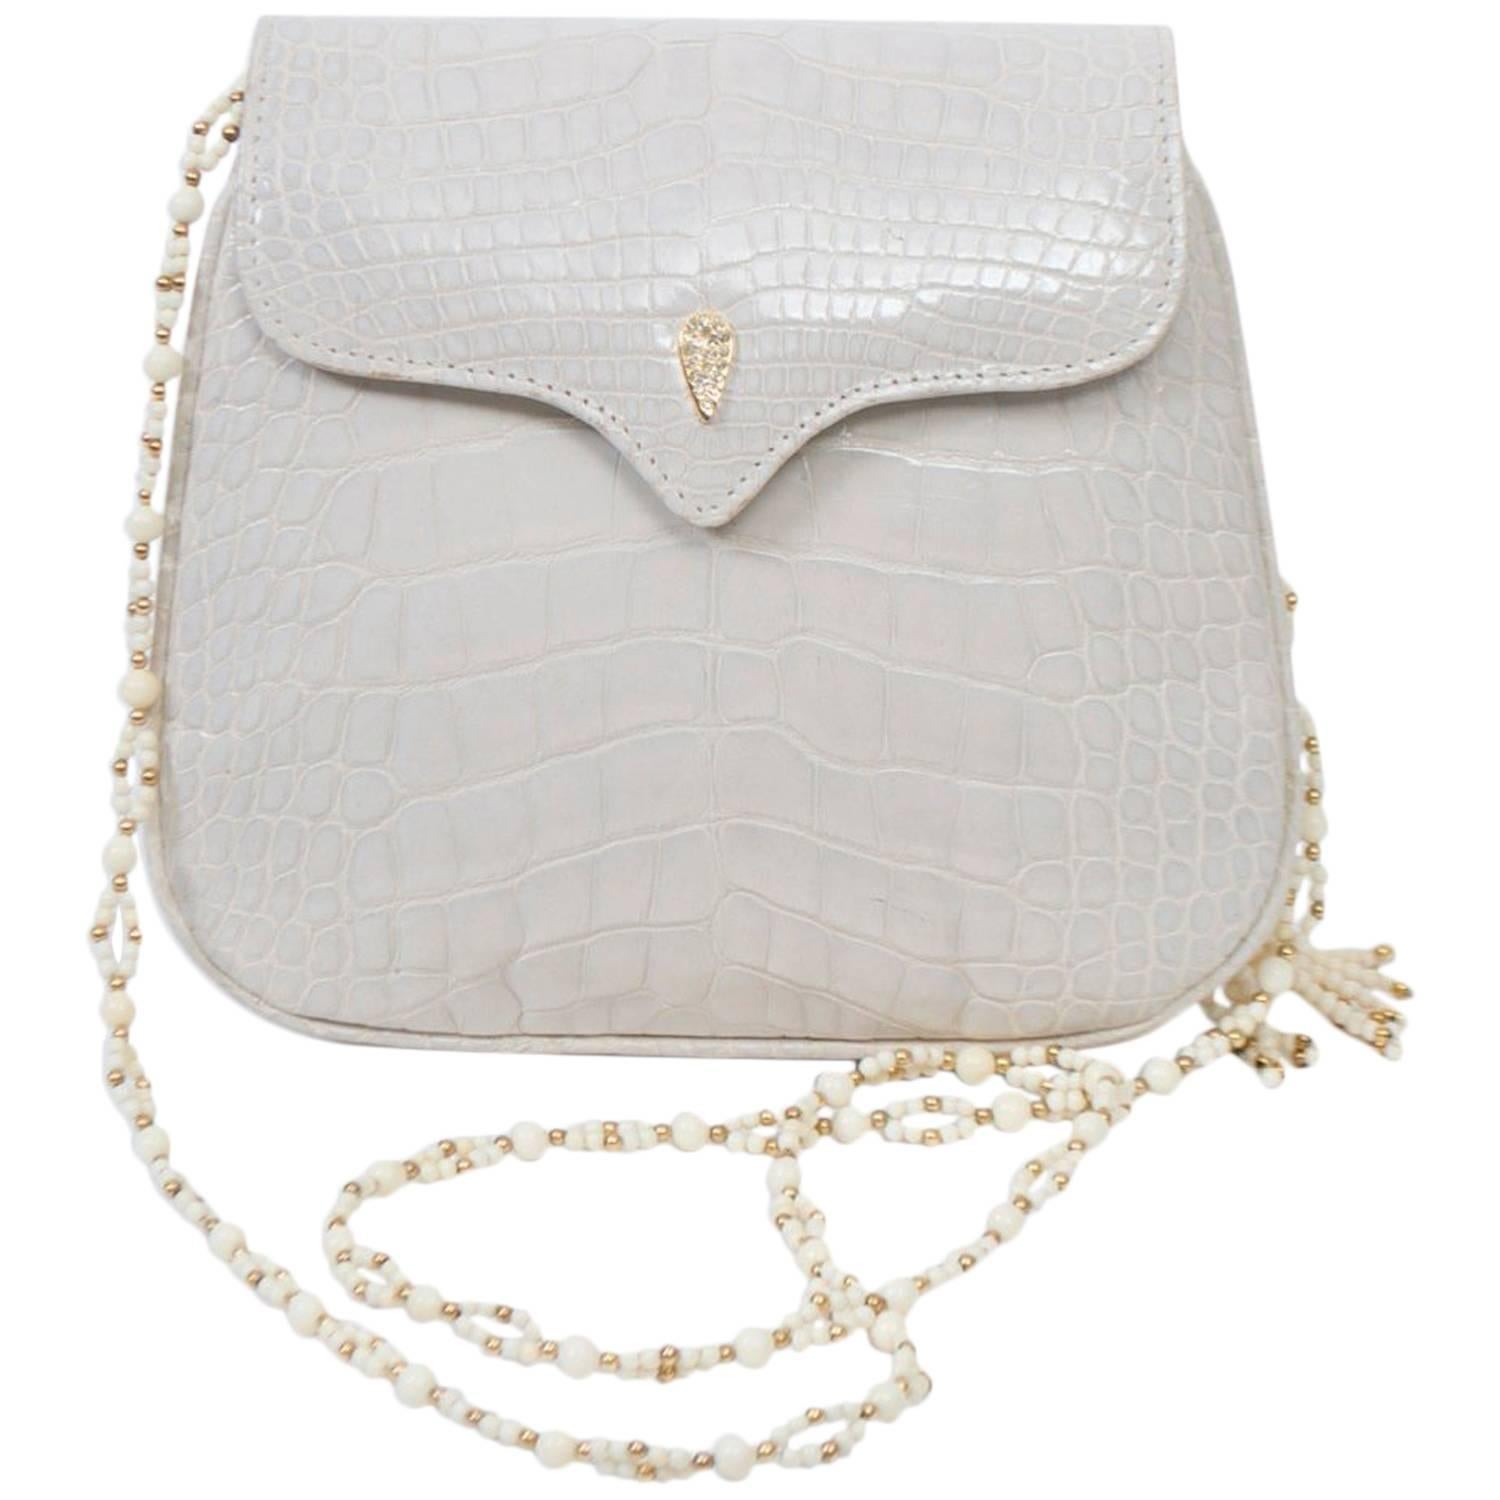 Lana White Alligator Clutch with Two Shoulder Straps